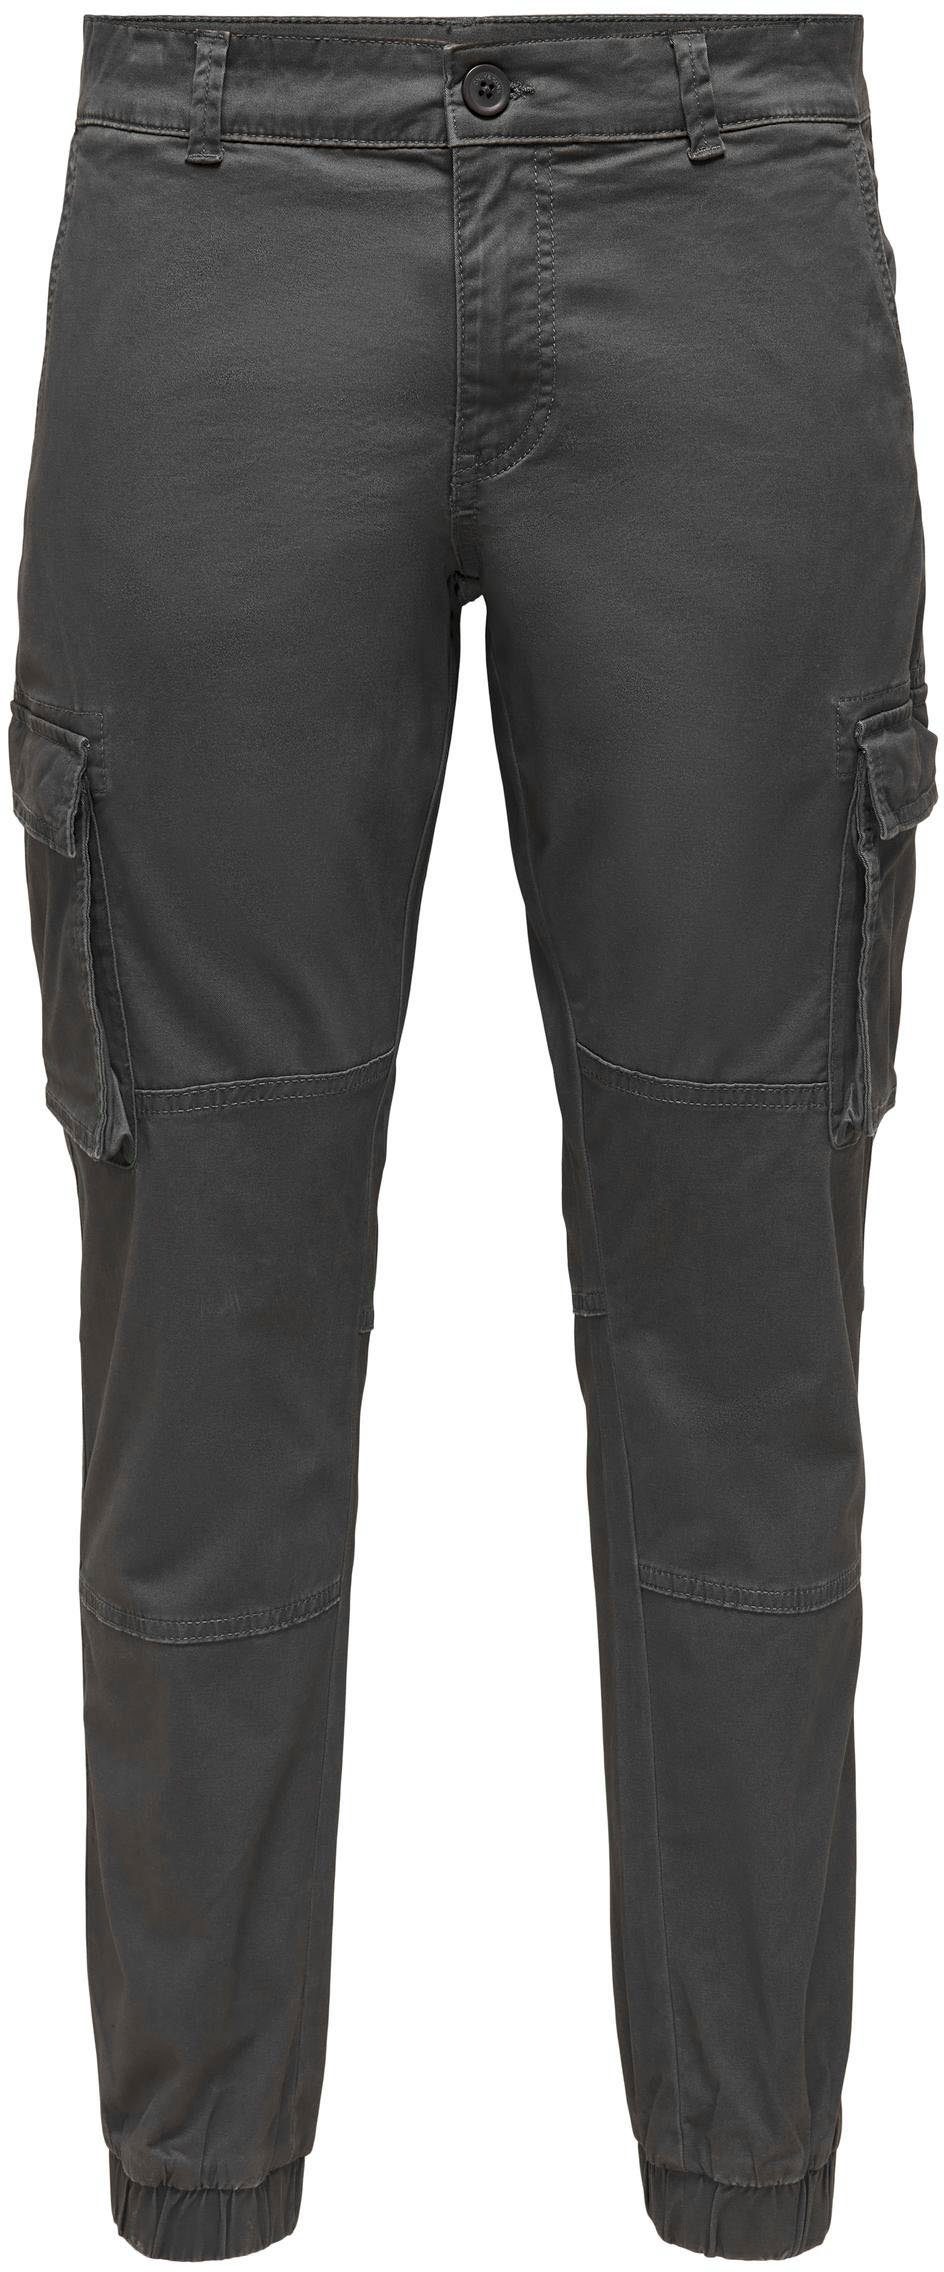 CAM CARGO & pinstripe ONLY CUFF STAGE SONS Cargohose grey